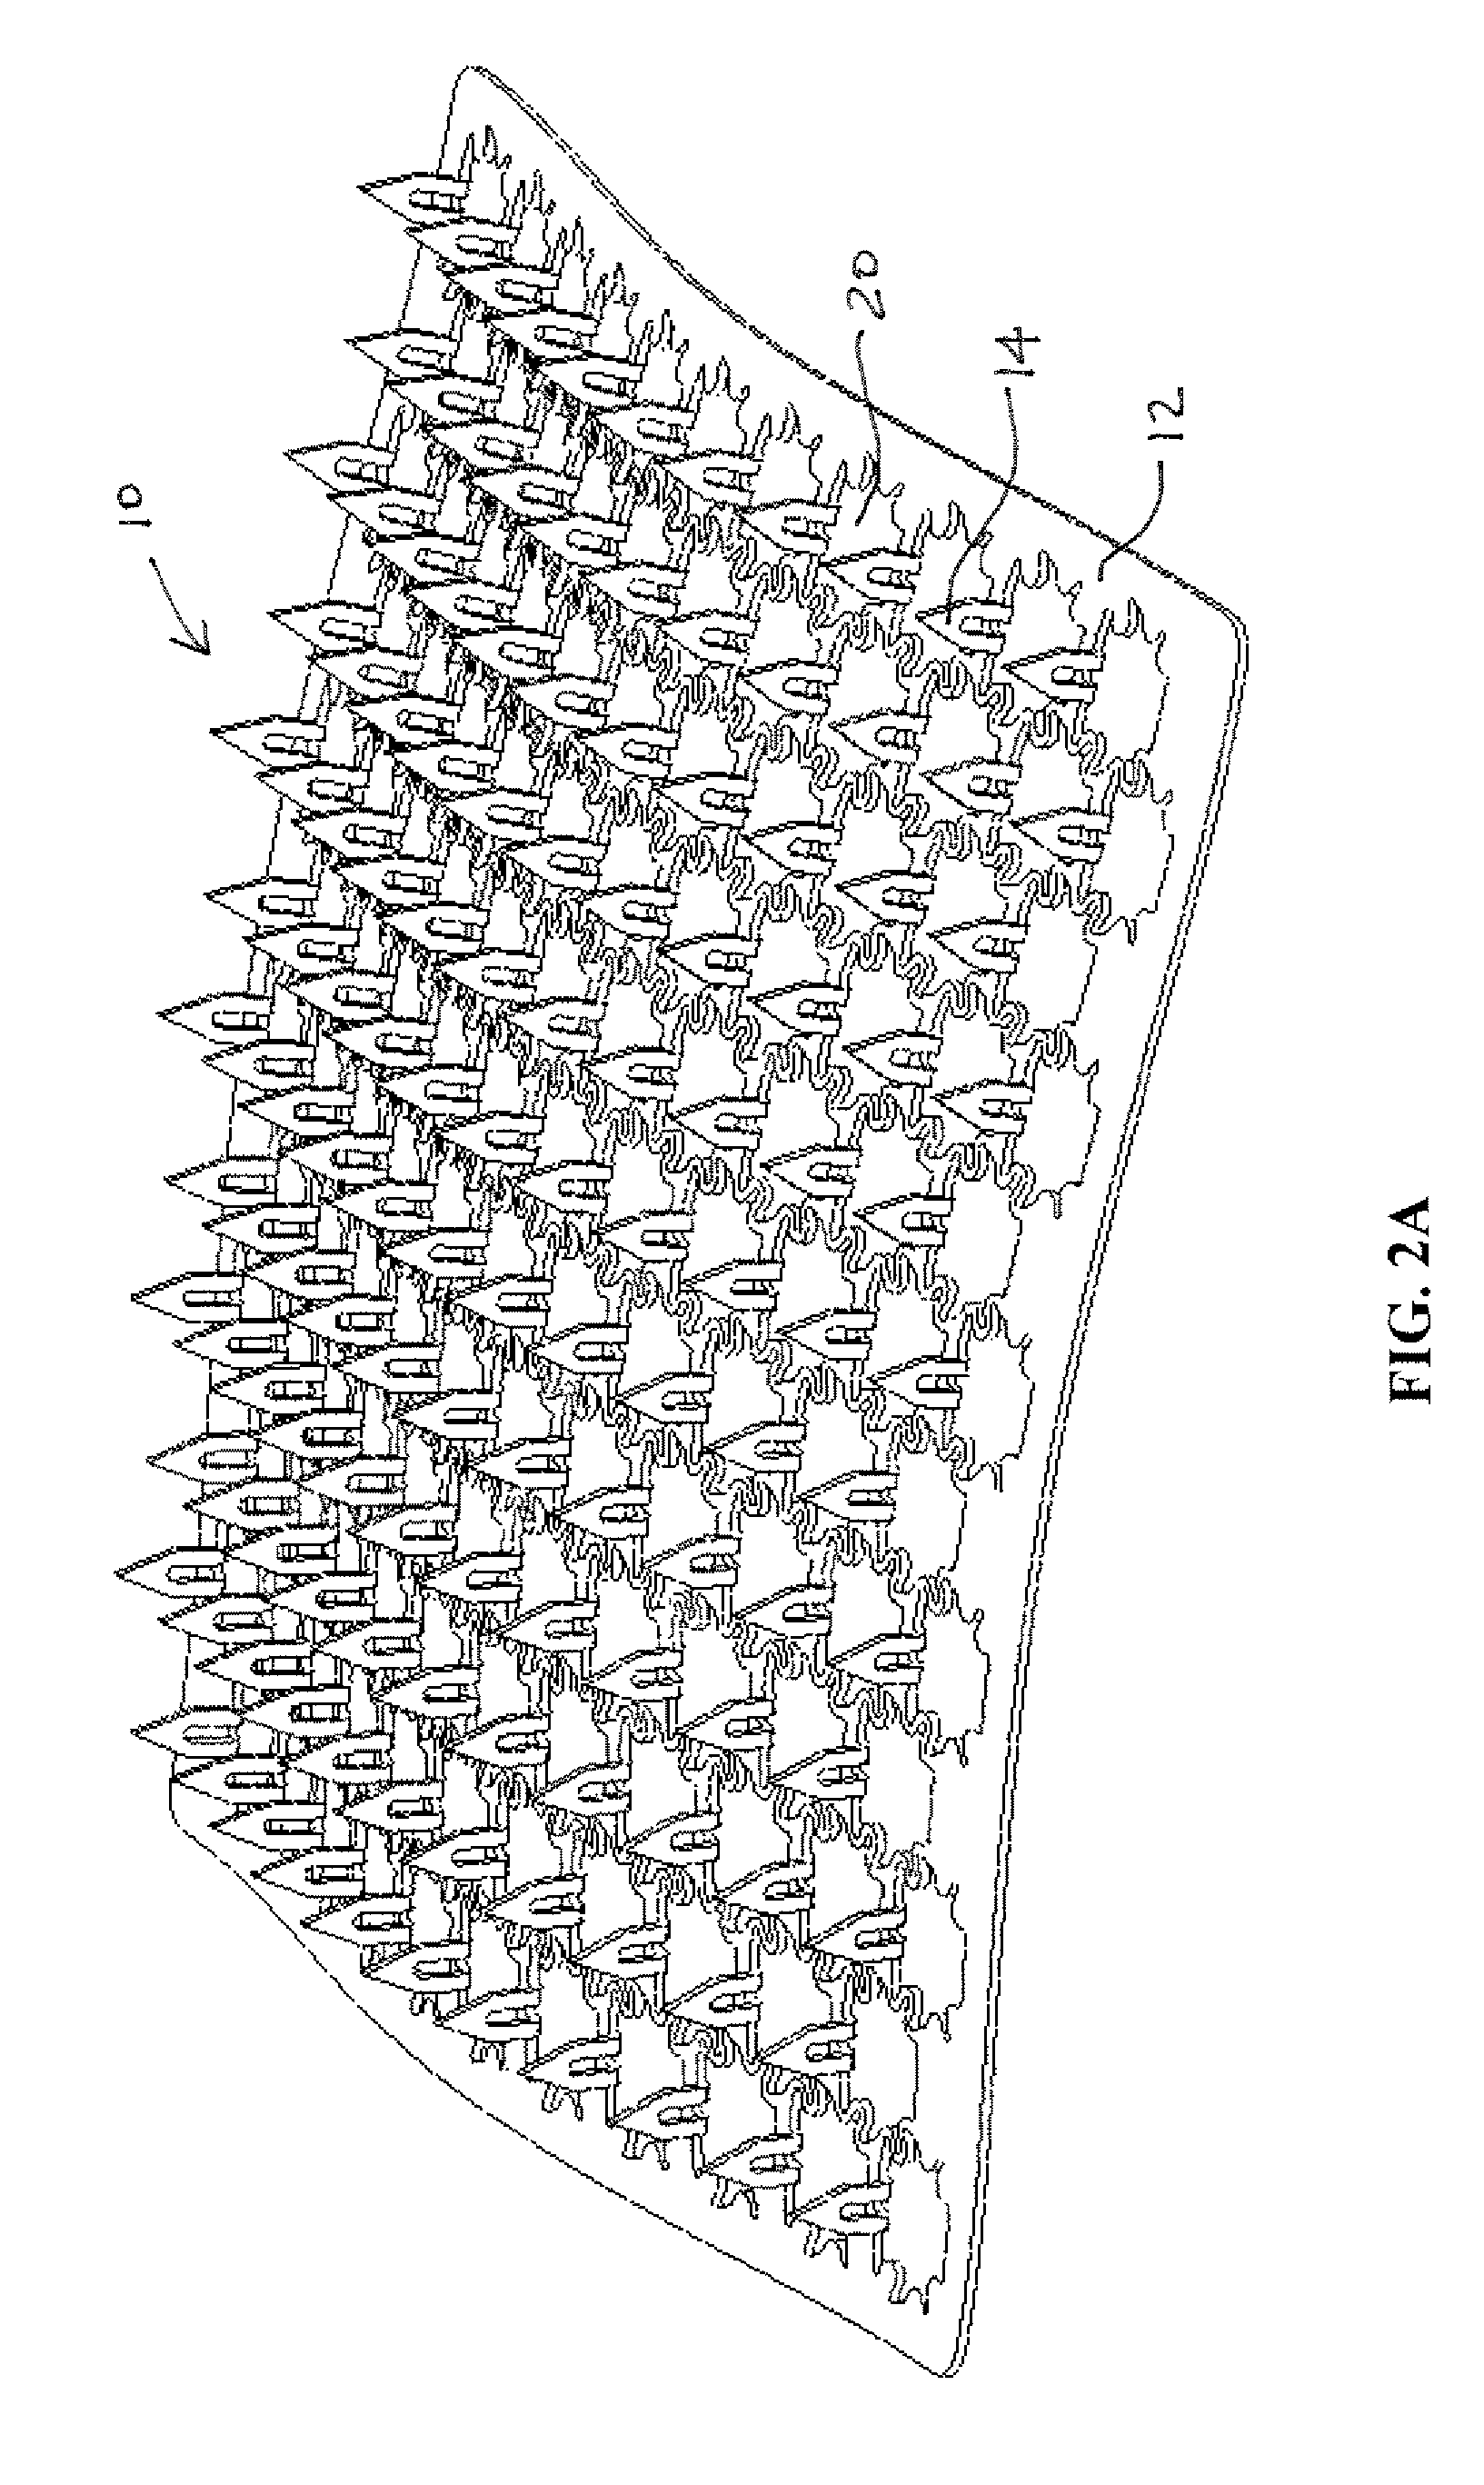 Tissue conforming microneedle array and patch for transdermal drug delivery or biological fluid collection